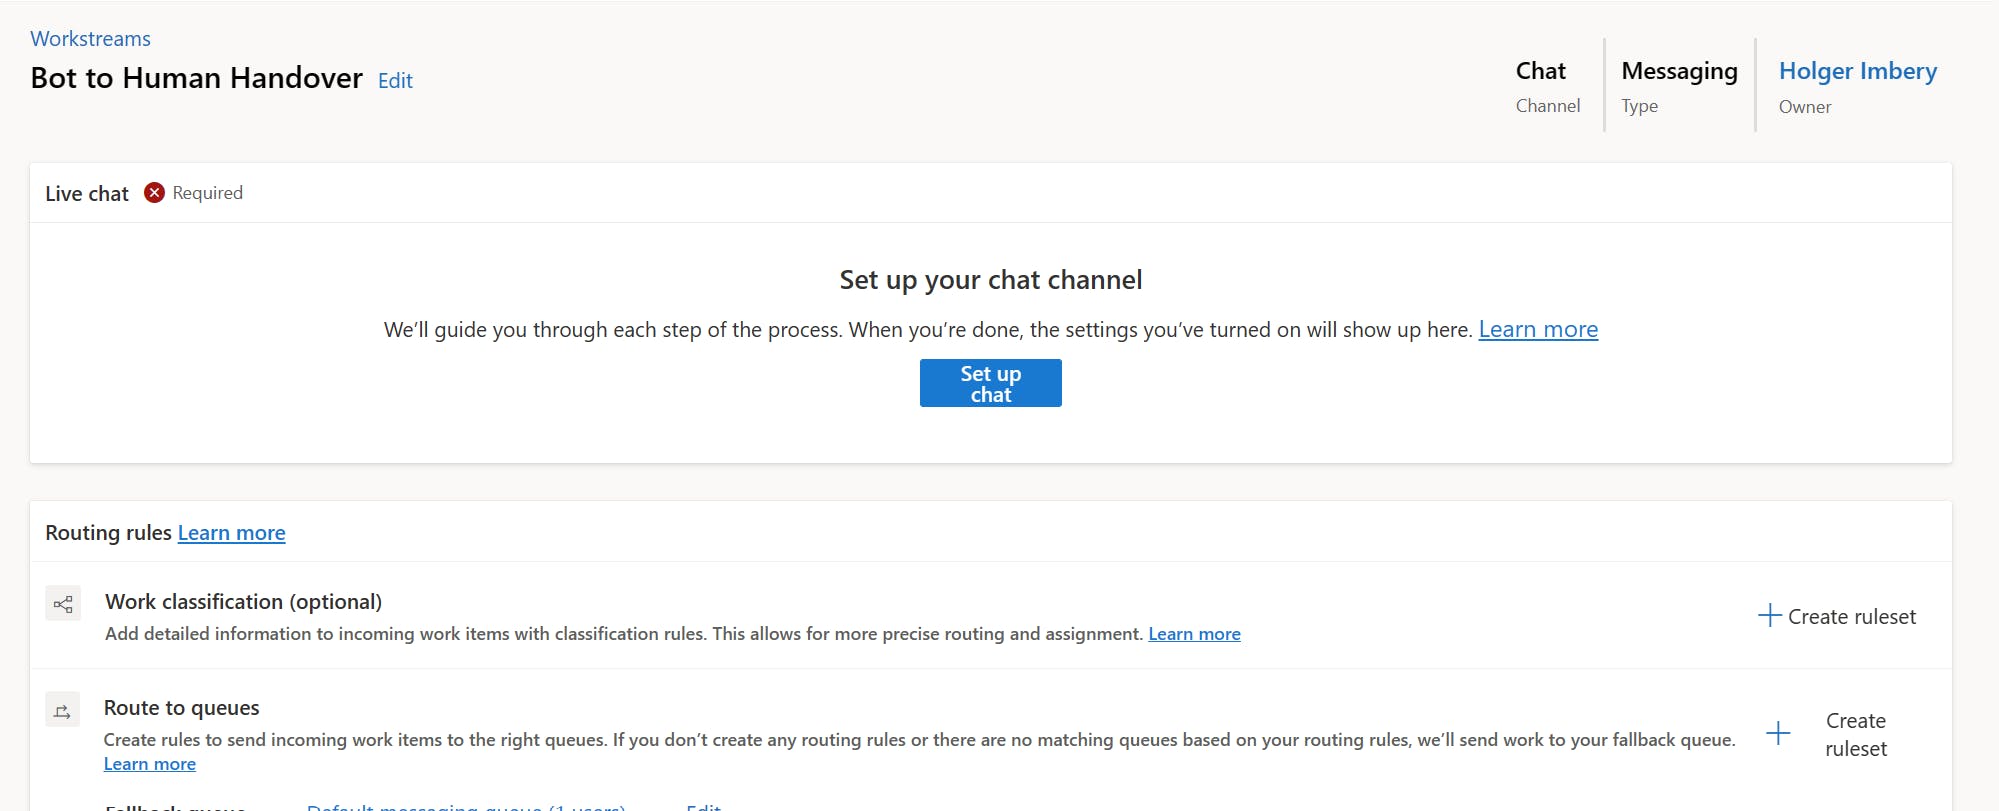 Figure 24: see "live chat required" message